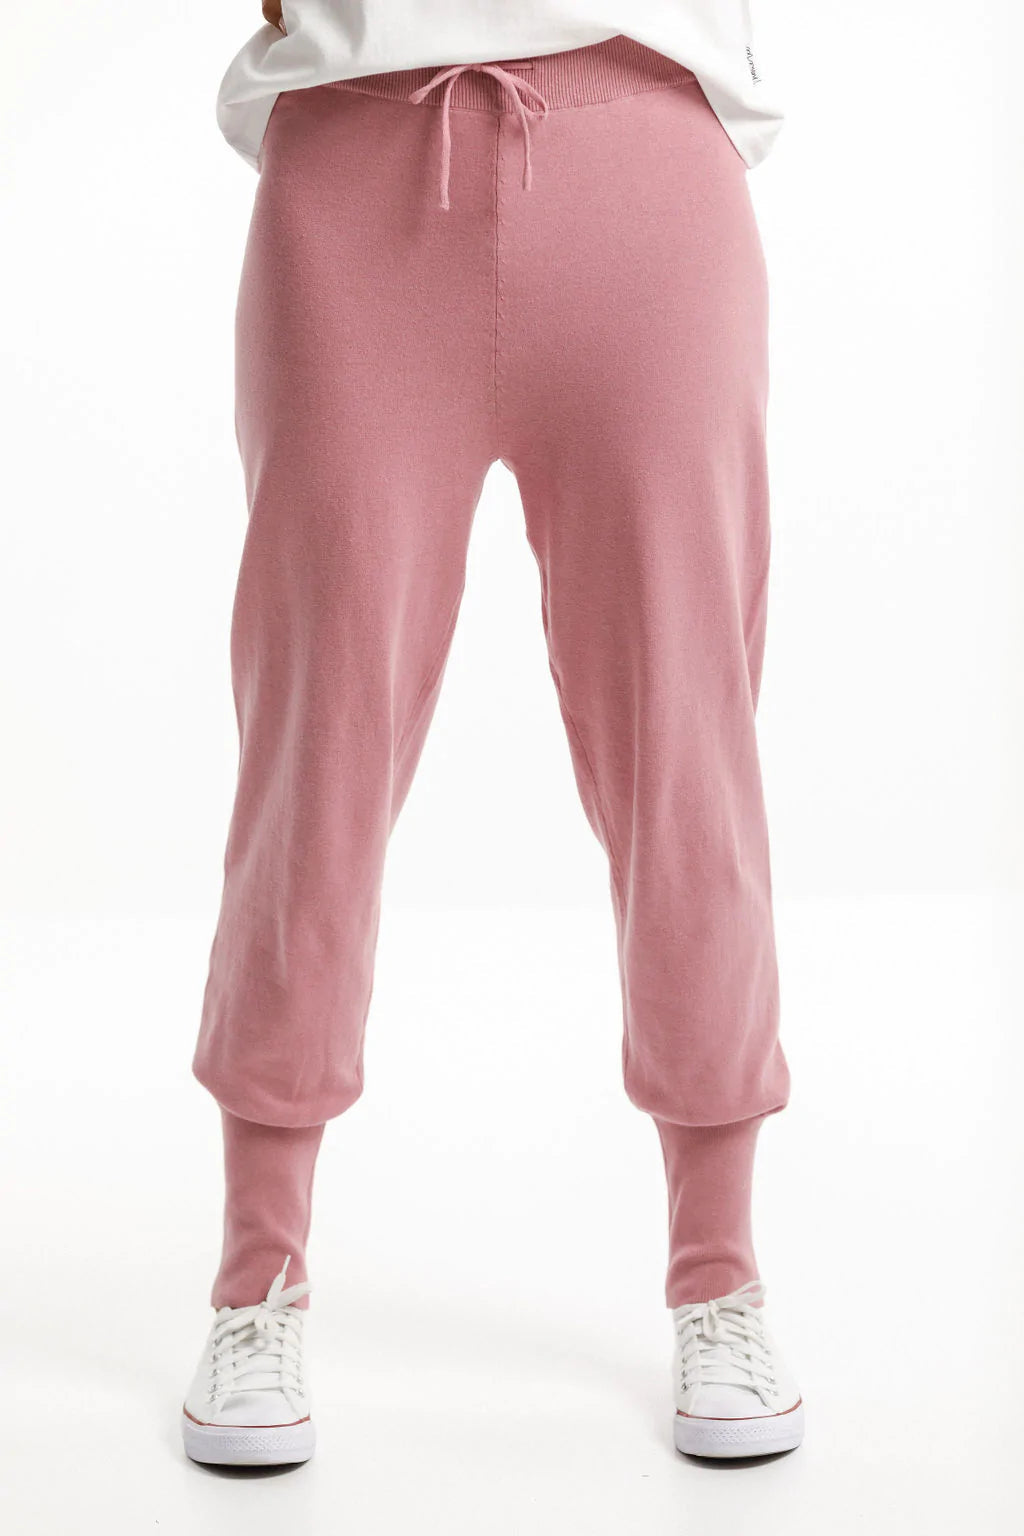 Knit Loungers Rose Bud - HOME LEE Pant 8 10 12 14 16 